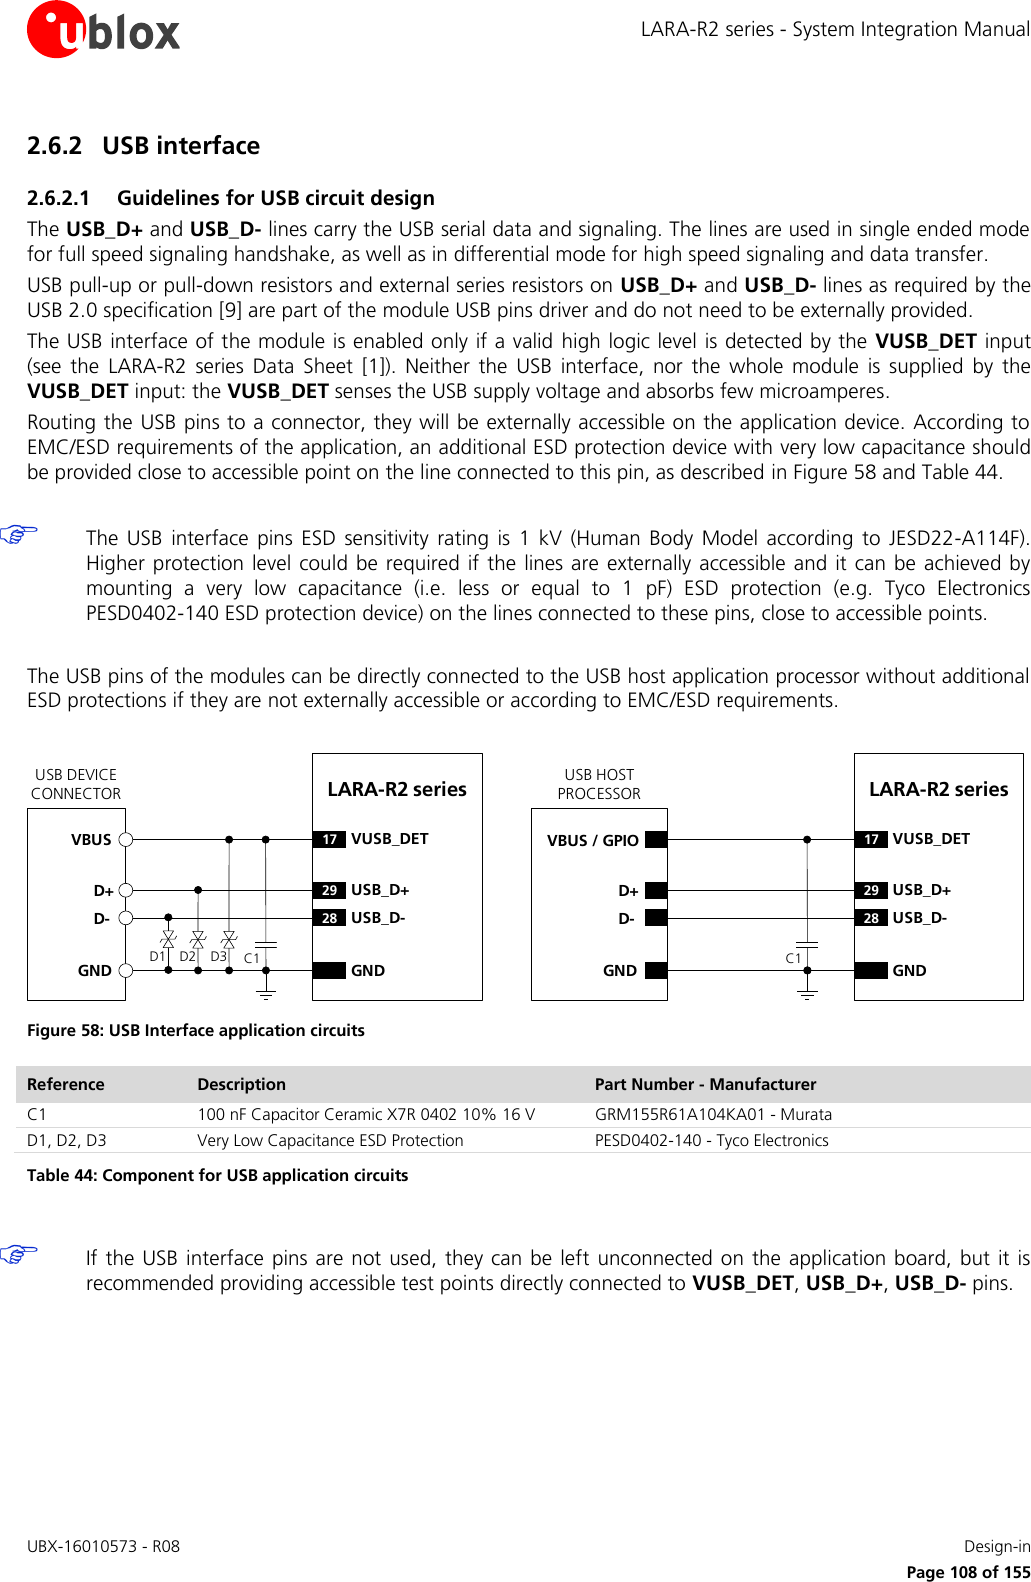 LARA-R2 series - System Integration Manual UBX-16010573 - R08    Design-in     Page 108 of 155 2.6.2 USB interface 2.6.2.1 Guidelines for USB circuit design The USB_D+ and USB_D- lines carry the USB serial data and signaling. The lines are used in single ended mode for full speed signaling handshake, as well as in differential mode for high speed signaling and data transfer. USB pull-up or pull-down resistors and external series resistors on USB_D+ and USB_D- lines as required by the USB 2.0 specification [9] are part of the module USB pins driver and do not need to be externally provided. The USB interface of the module is enabled only if a valid high logic level is detected by the VUSB_DET input (see  the  LARA-R2  series Data  Sheet [1]).  Neither  the  USB  interface,  nor  the  whole  module  is  supplied  by  the VUSB_DET input: the VUSB_DET senses the USB supply voltage and absorbs few microamperes. Routing the USB pins to a connector, they will be externally accessible on the application device. According to EMC/ESD requirements of the application, an additional ESD protection device with very low capacitance should be provided close to accessible point on the line connected to this pin, as described in Figure 58 and Table 44.   The  USB  interface  pins  ESD  sensitivity  rating  is  1  kV  (Human  Body  Model  according  to  JESD22-A114F). Higher protection level  could  be required if  the lines are  externally accessible and it can be  achieved  by mounting  a  very  low  capacitance  (i.e.  less  or  equal  to  1  pF)  ESD  protection  (e.g.  Tyco  Electronics PESD0402-140 ESD protection device) on the lines connected to these pins, close to accessible points.  The USB pins of the modules can be directly connected to the USB host application processor without additional ESD protections if they are not externally accessible or according to EMC/ESD requirements.  LARA-R2 series D+D-GND29 USB_D+28 USB_D-GNDUSB DEVICE CONNECTORD1 D2VBUSC117 VUSB_DETLARA-R2 series D+D-GND29 USB_D+28 USB_D-GNDUSB HOST PROCESSORC117 VUSB_DETVBUS / GPIOD3 Figure 58: USB Interface application circuits Reference Description Part Number - Manufacturer C1 100 nF Capacitor Ceramic X7R 0402 10% 16 V GRM155R61A104KA01 - Murata D1, D2, D3 Very Low Capacitance ESD Protection PESD0402-140 - Tyco Electronics  Table 44: Component for USB application circuits   If the  USB interface pins are not  used, they  can  be left unconnected on the application board,  but  it is recommended providing accessible test points directly connected to VUSB_DET, USB_D+, USB_D- pins.  